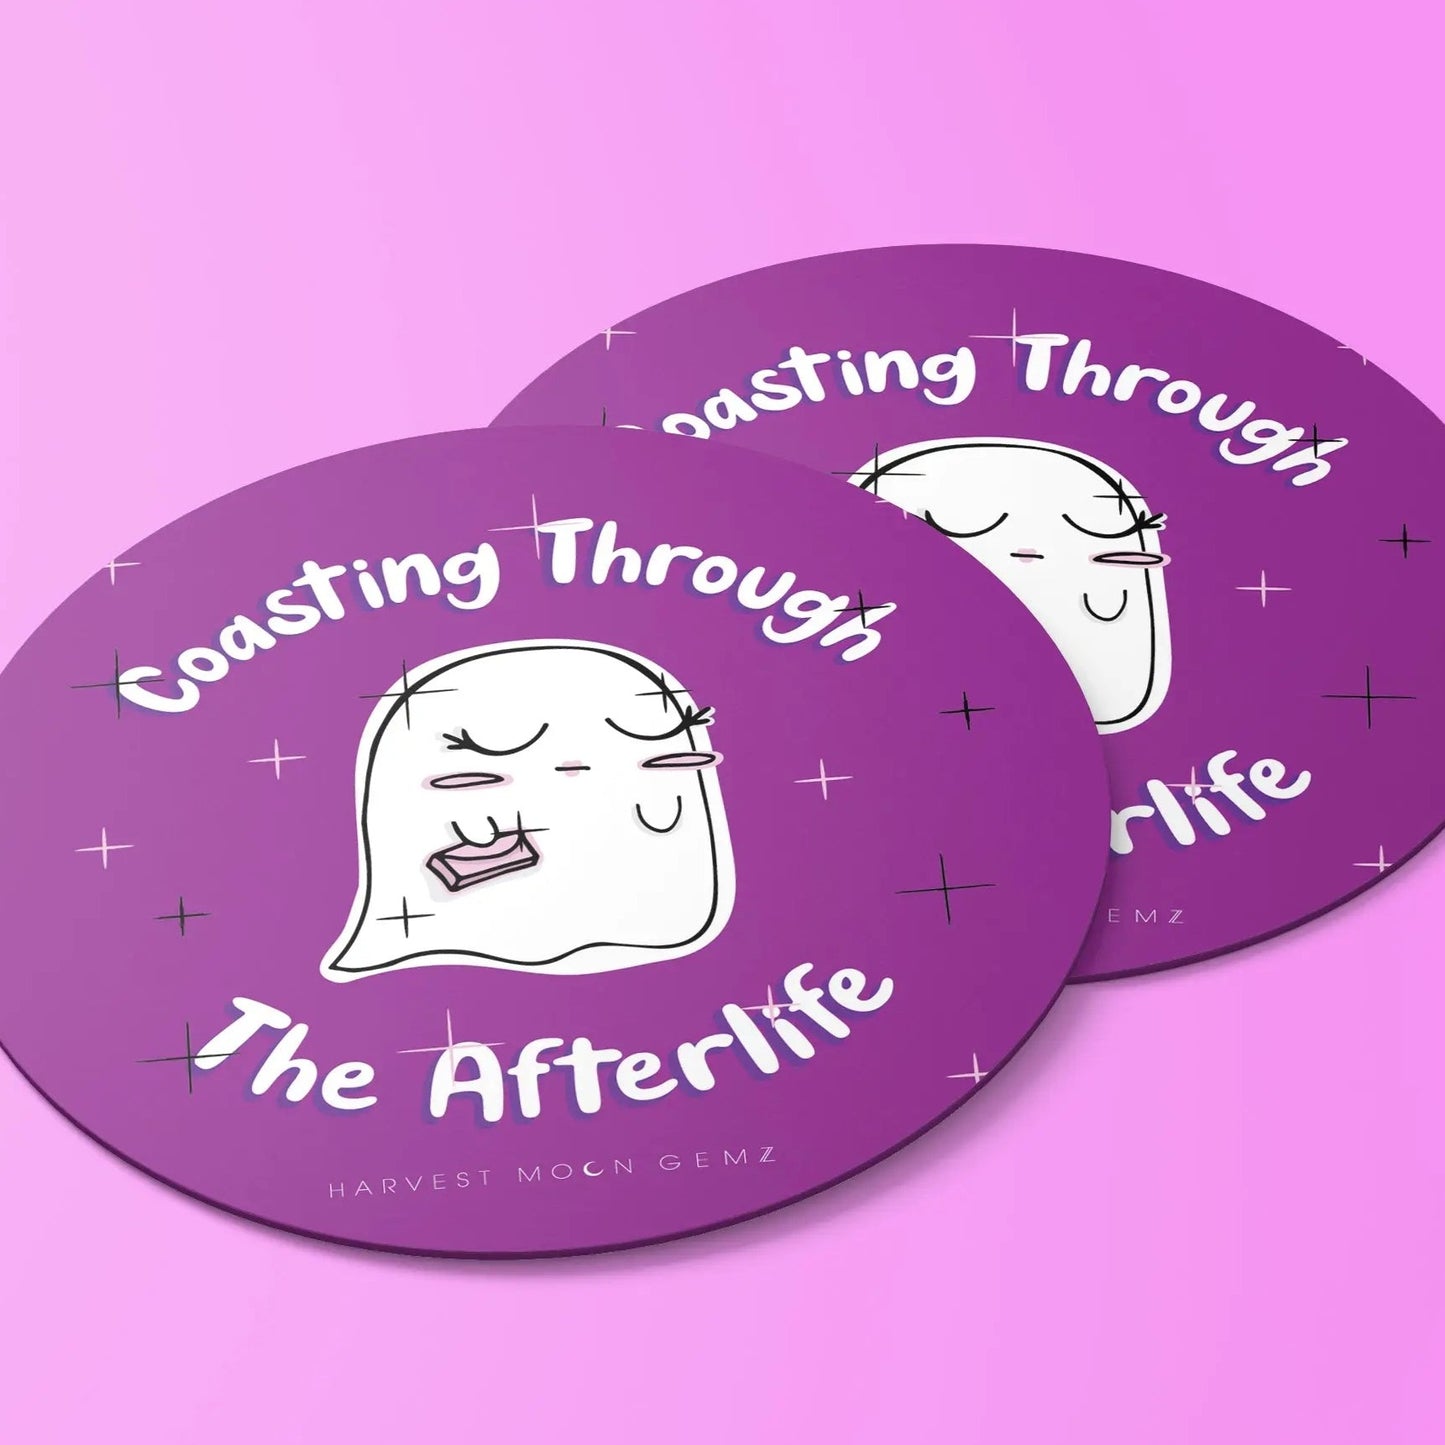 Coasting Through the Afterlife Coasters Harvest Moon Gemz